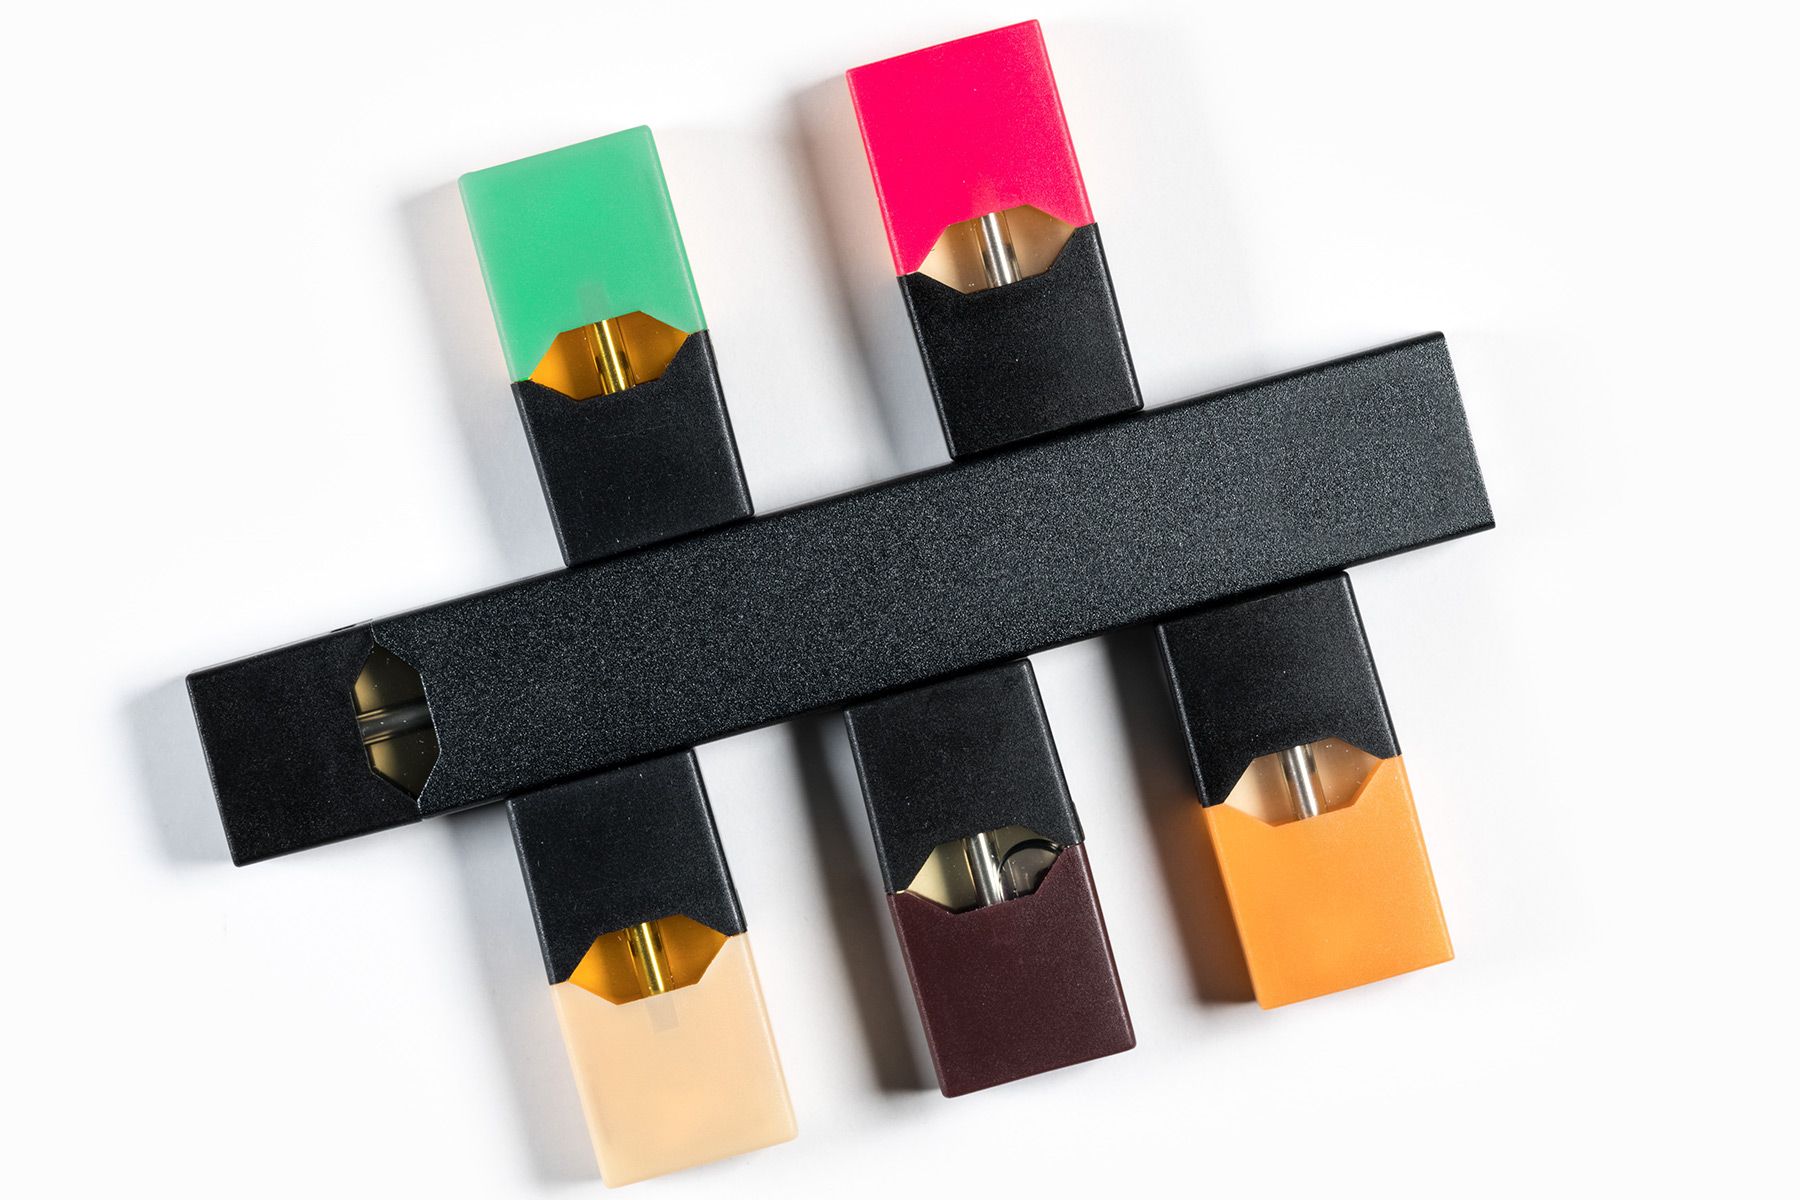 FDA Moves to Block Some Vape Products, Delays Action on Juul